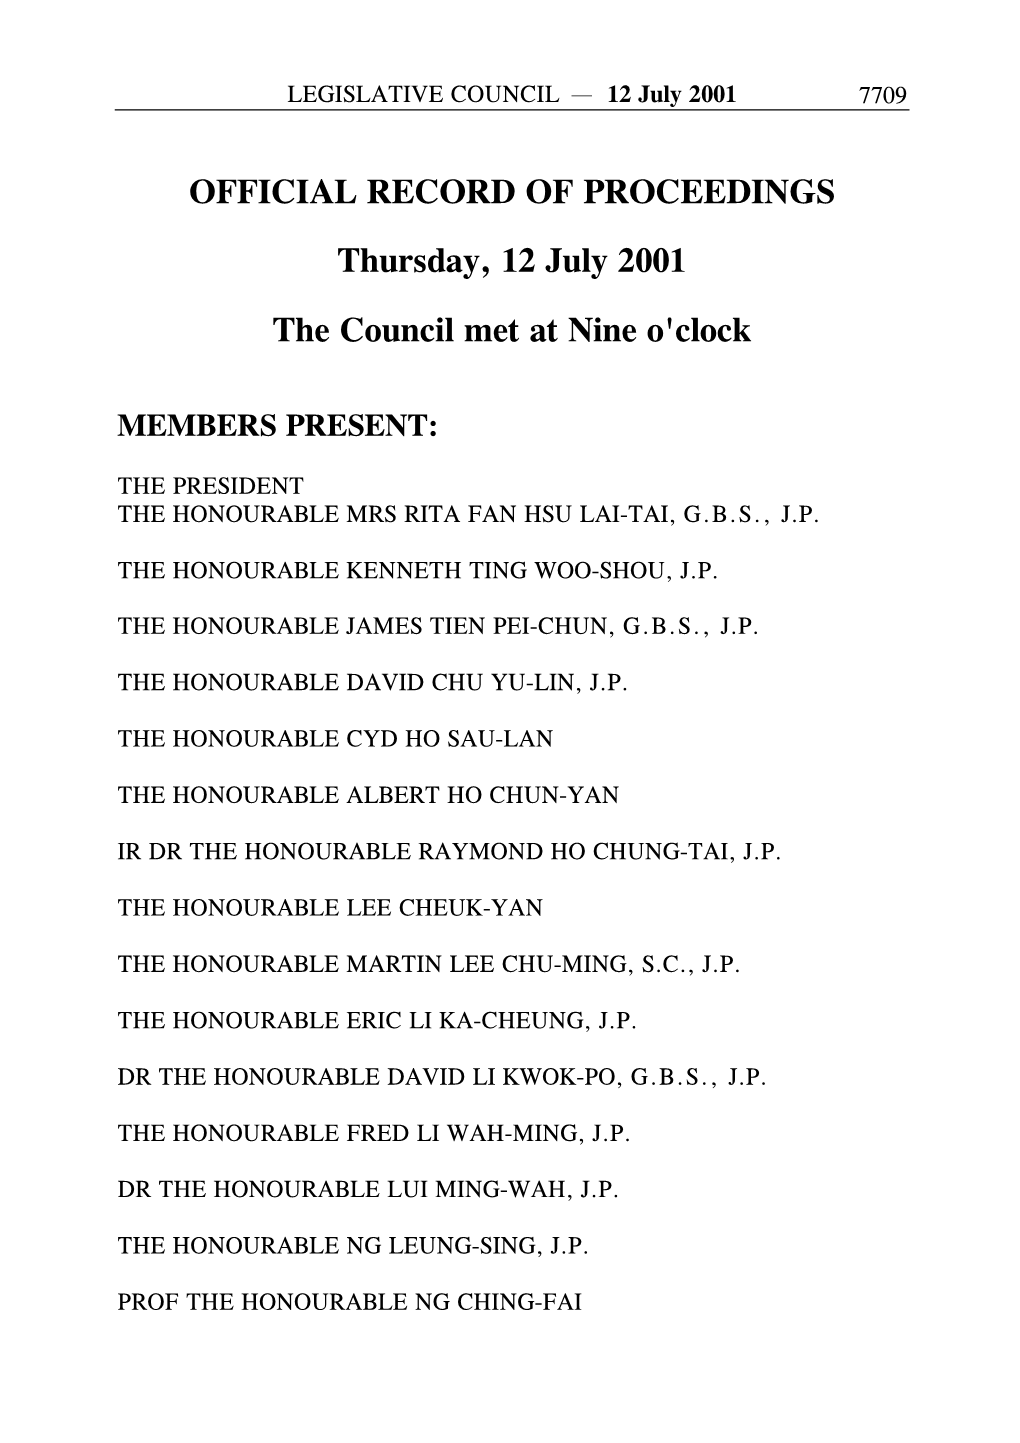 OFFICIAL RECORD of PROCEEDINGS Thursday, 12 July